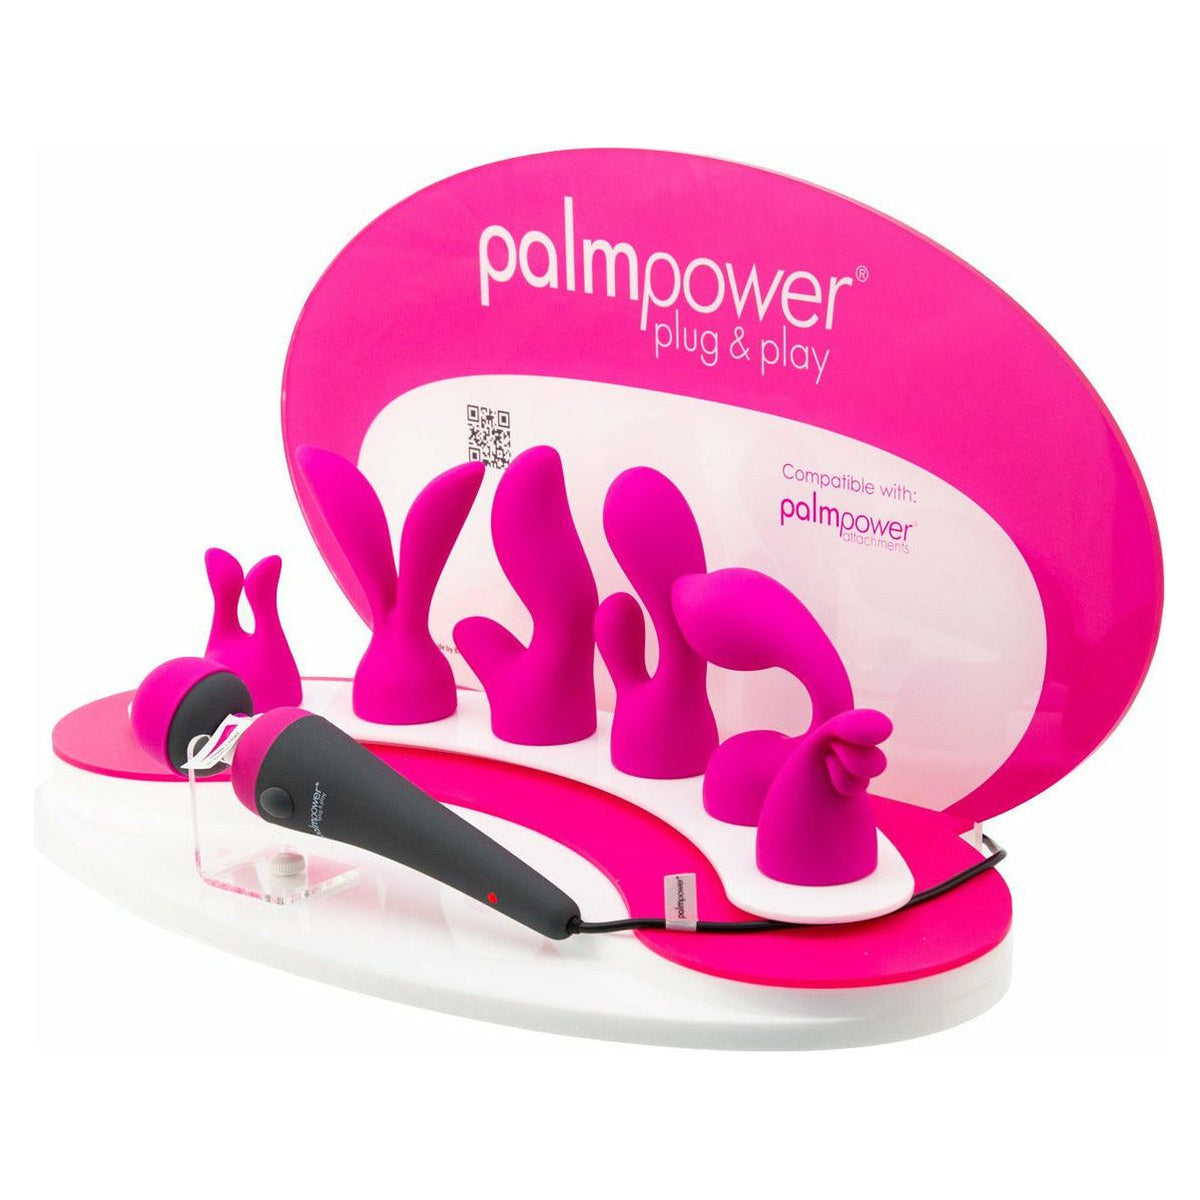 PalmPower Counter Display * 1 Per Store * With Purchase of PalmPower Plug&amp;Play